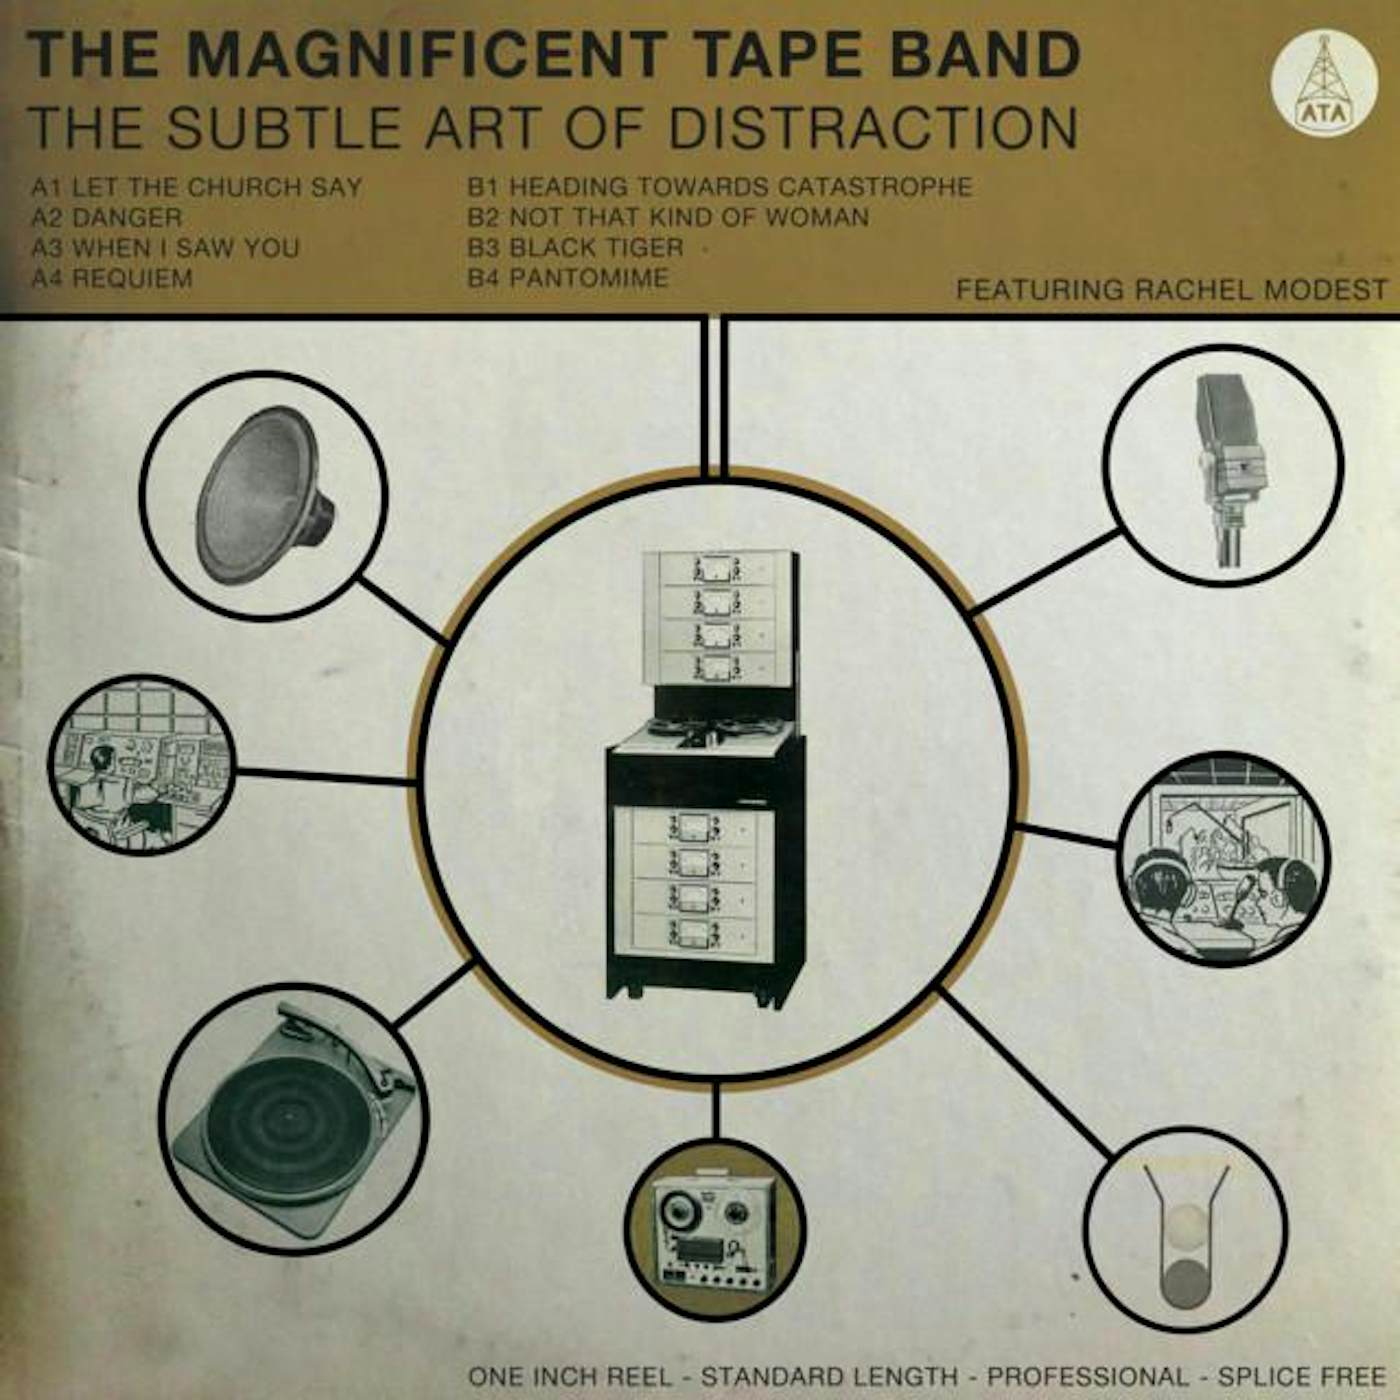 The Magnificent Tape Band